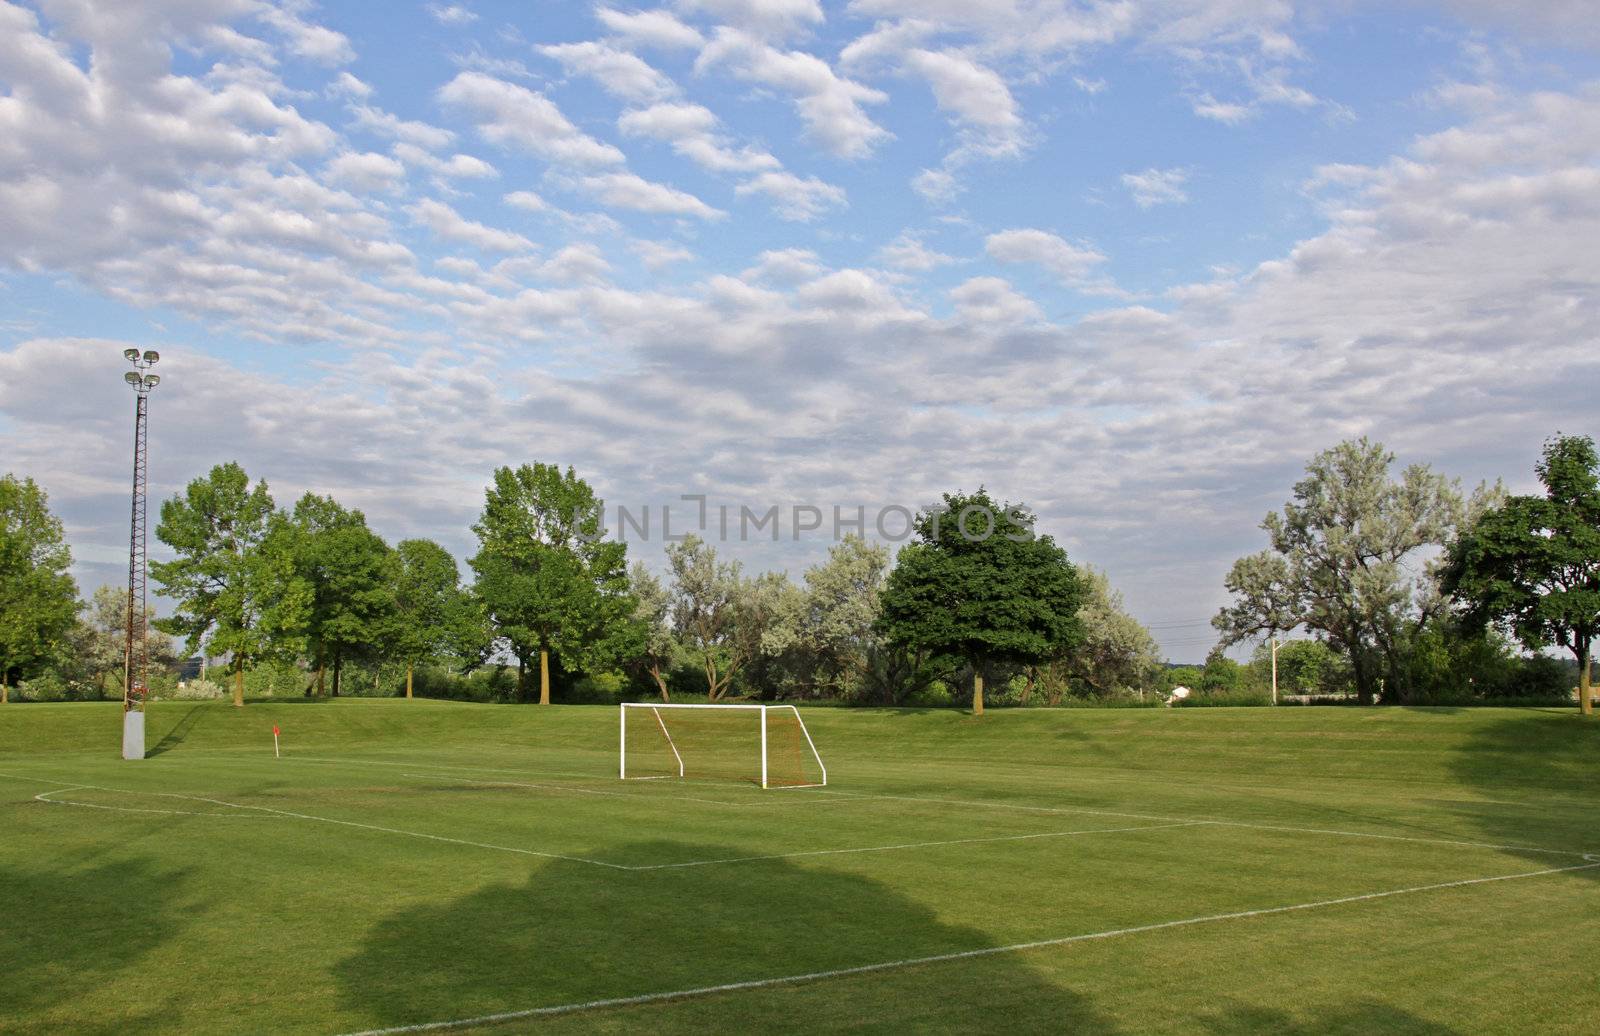 A mixed sky over an unoccupied soccer field with trees in the background.
